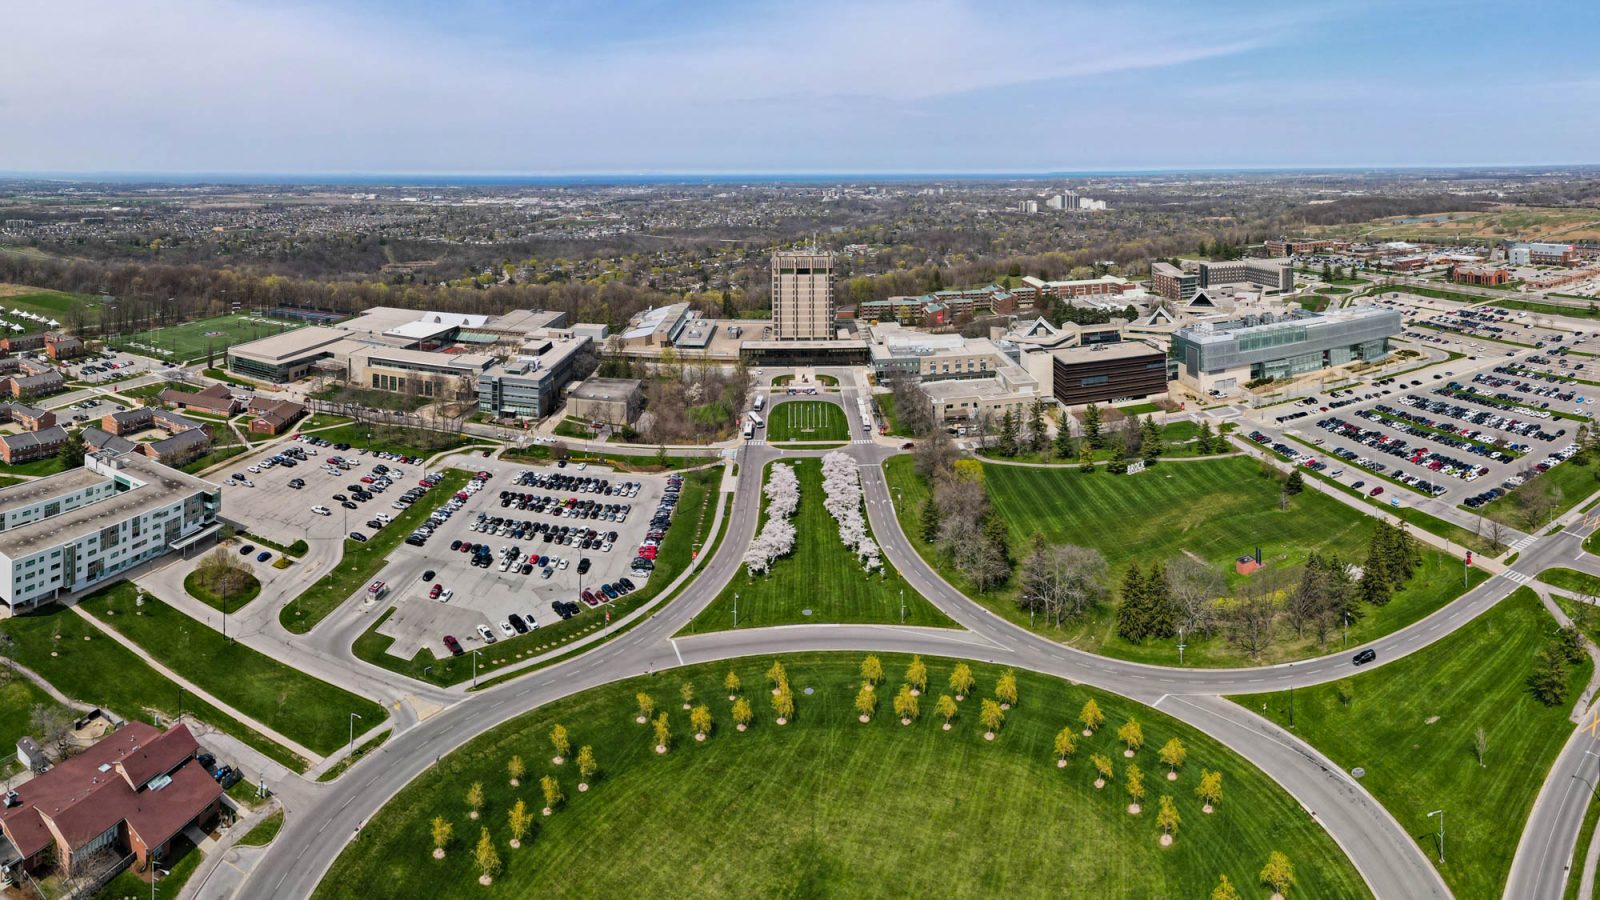 Brock University's main campus from the sky.